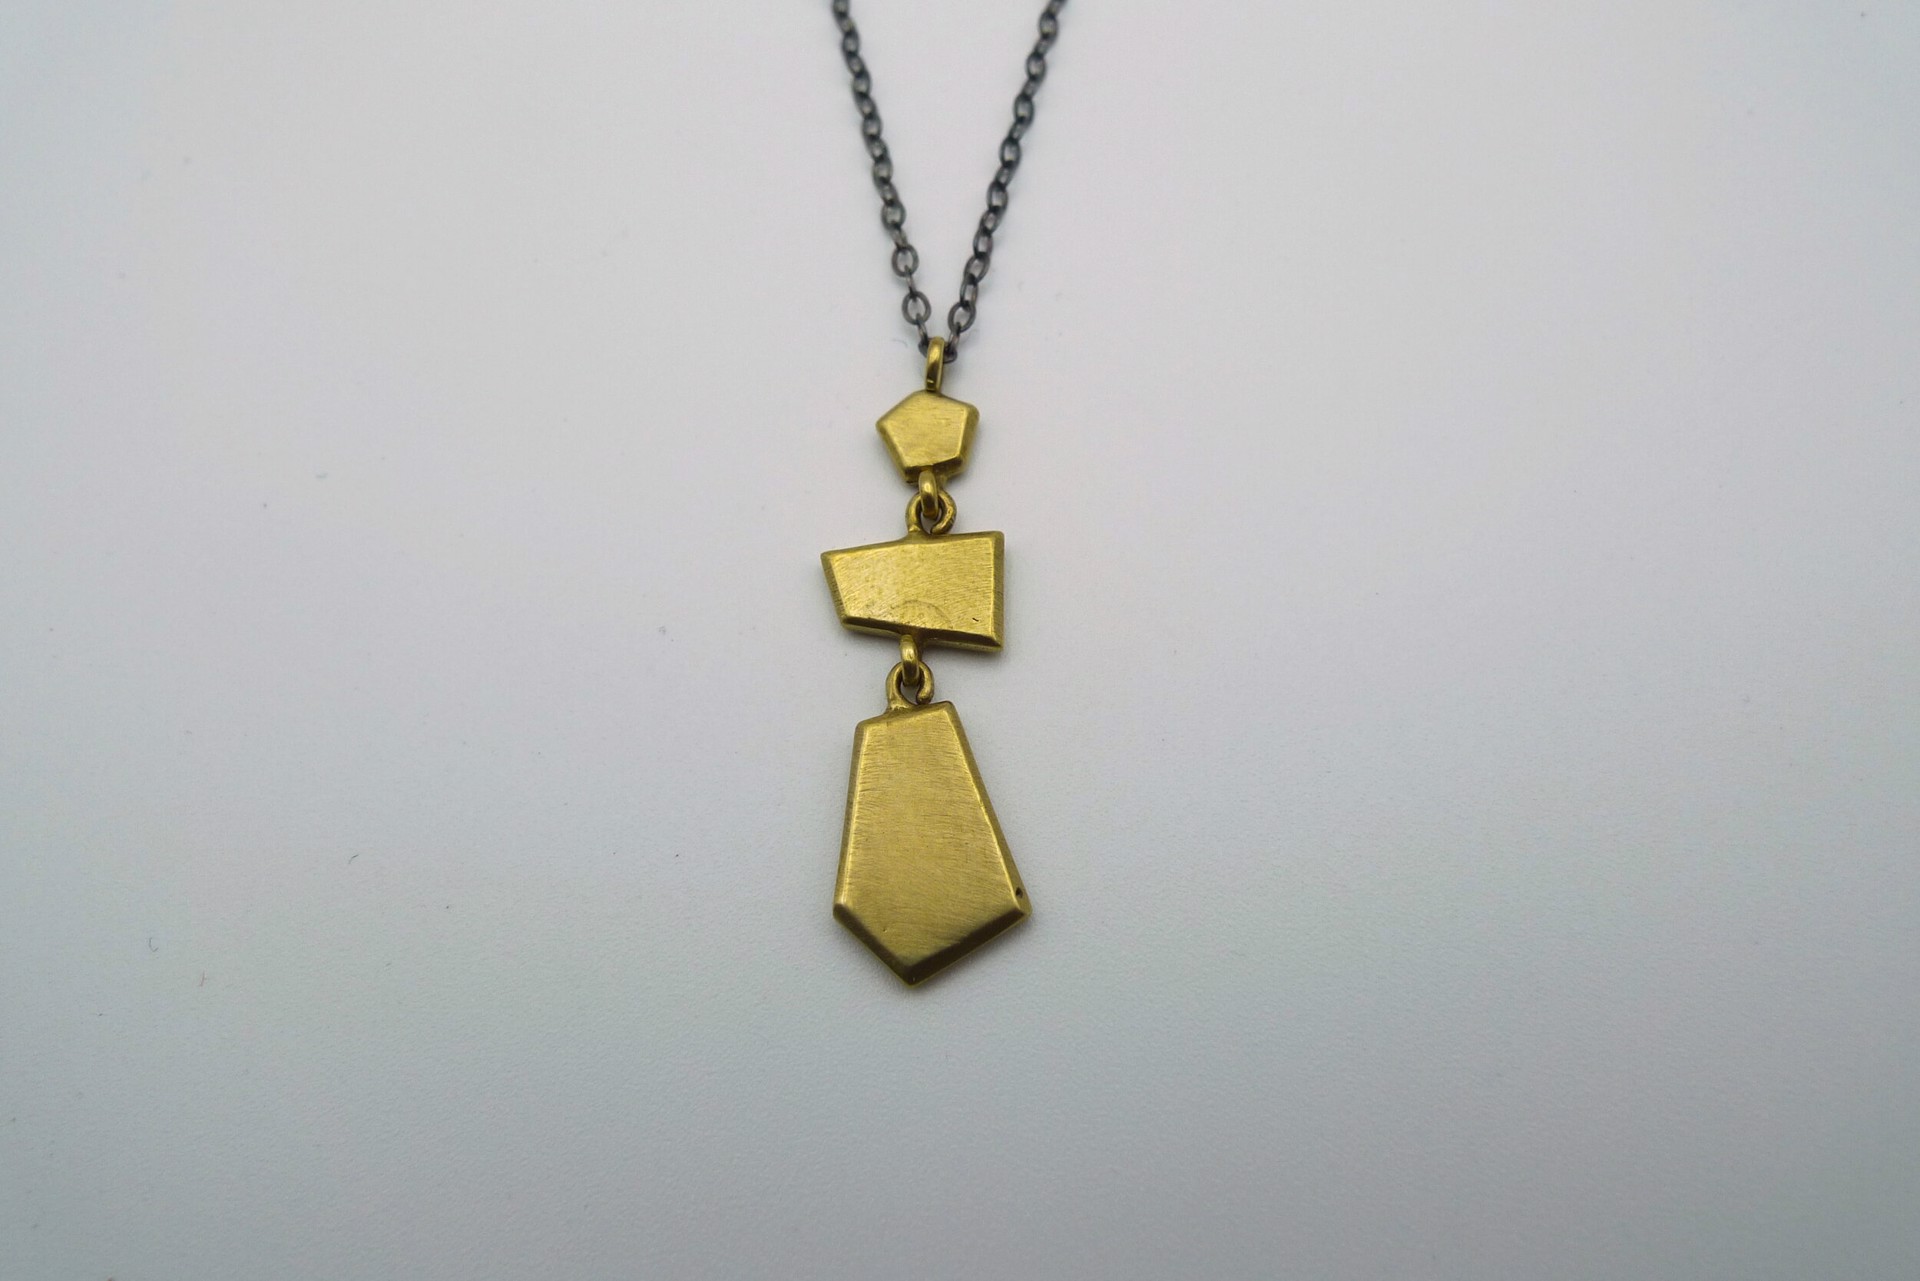 Faceted Stacked Necklace by Leah Staley